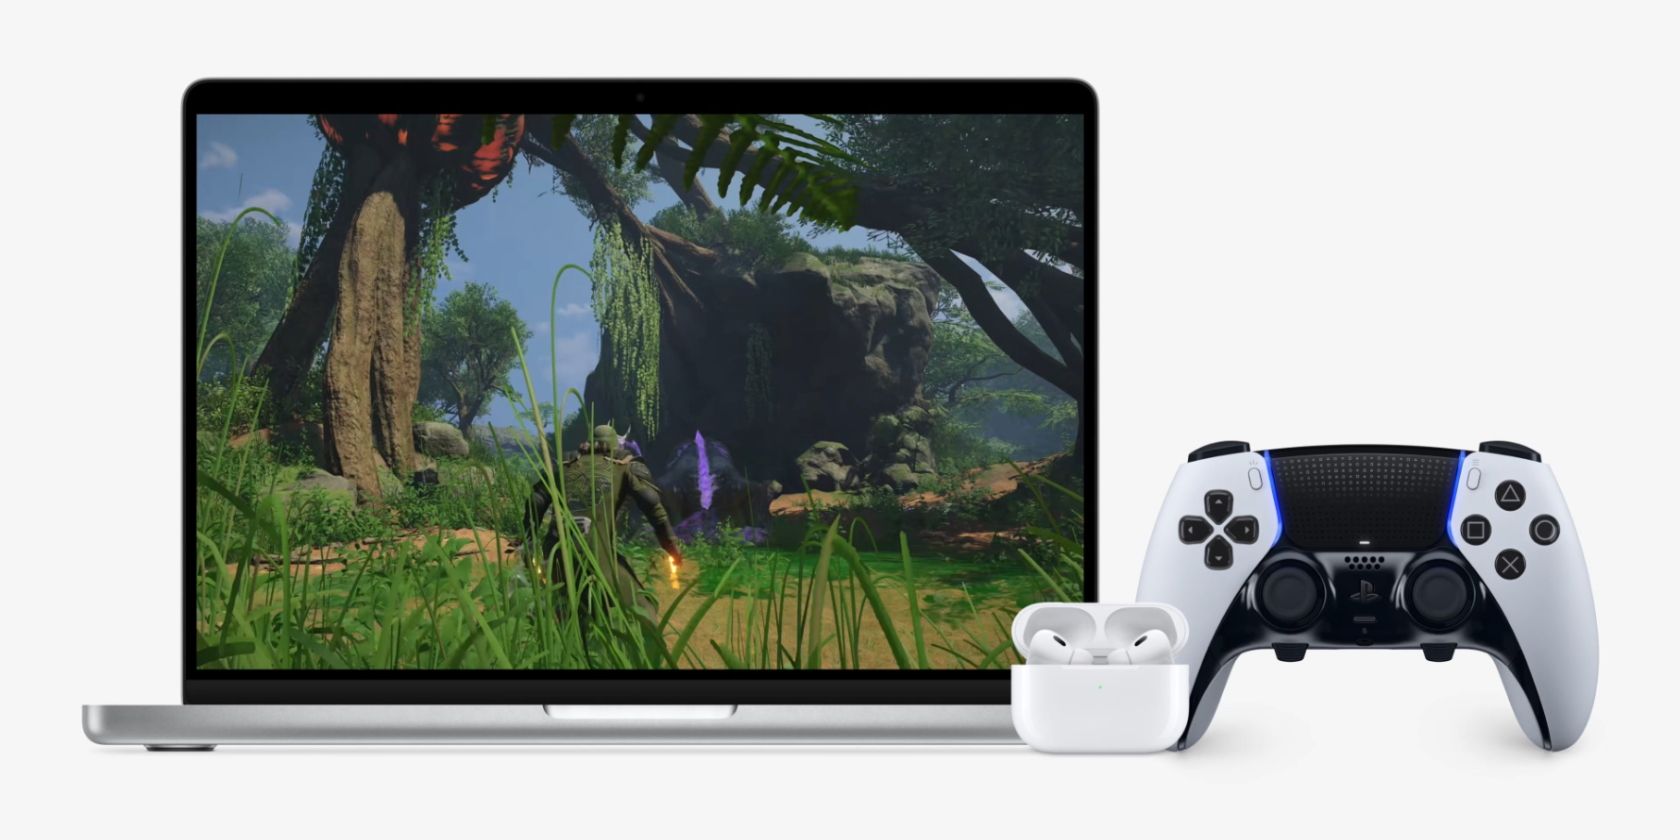 Gaming on a MacBook with AirPods and DualSense controller